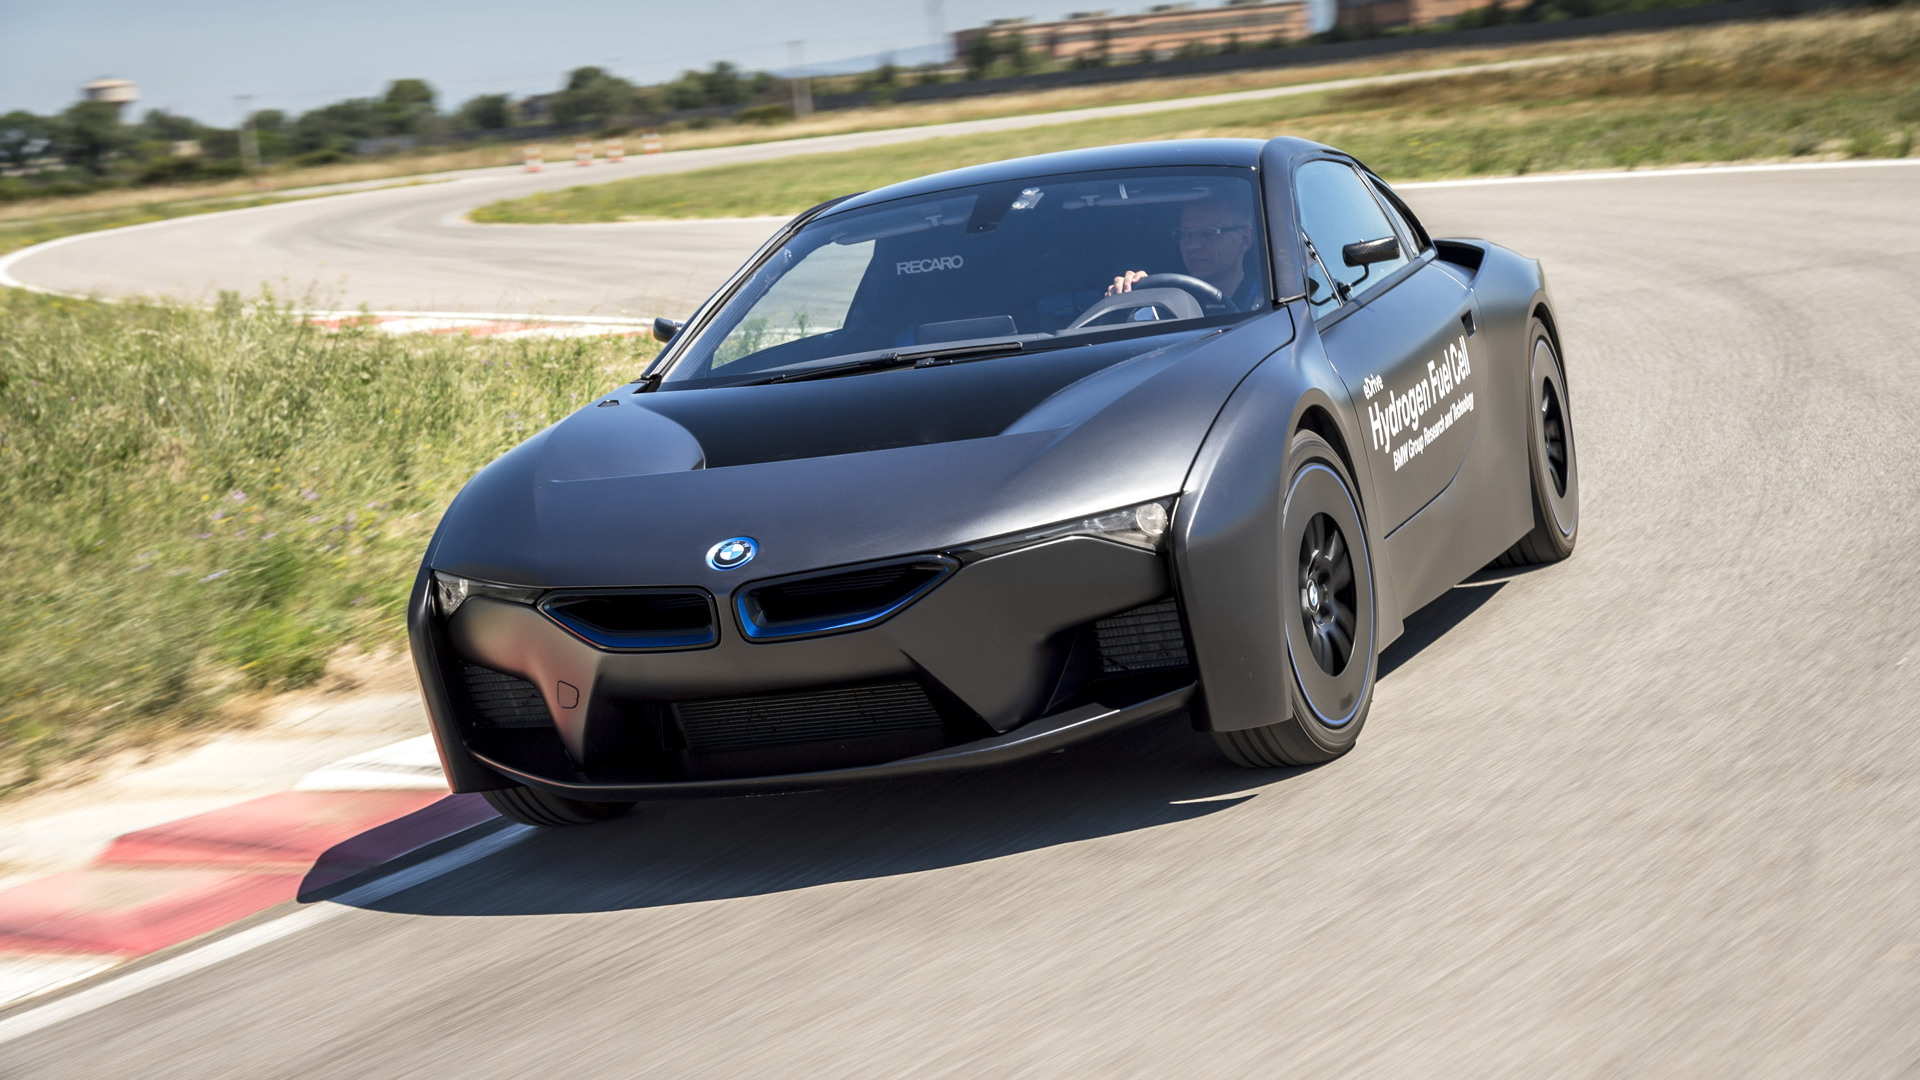 BMW i8 hydrogen fuel cell concept